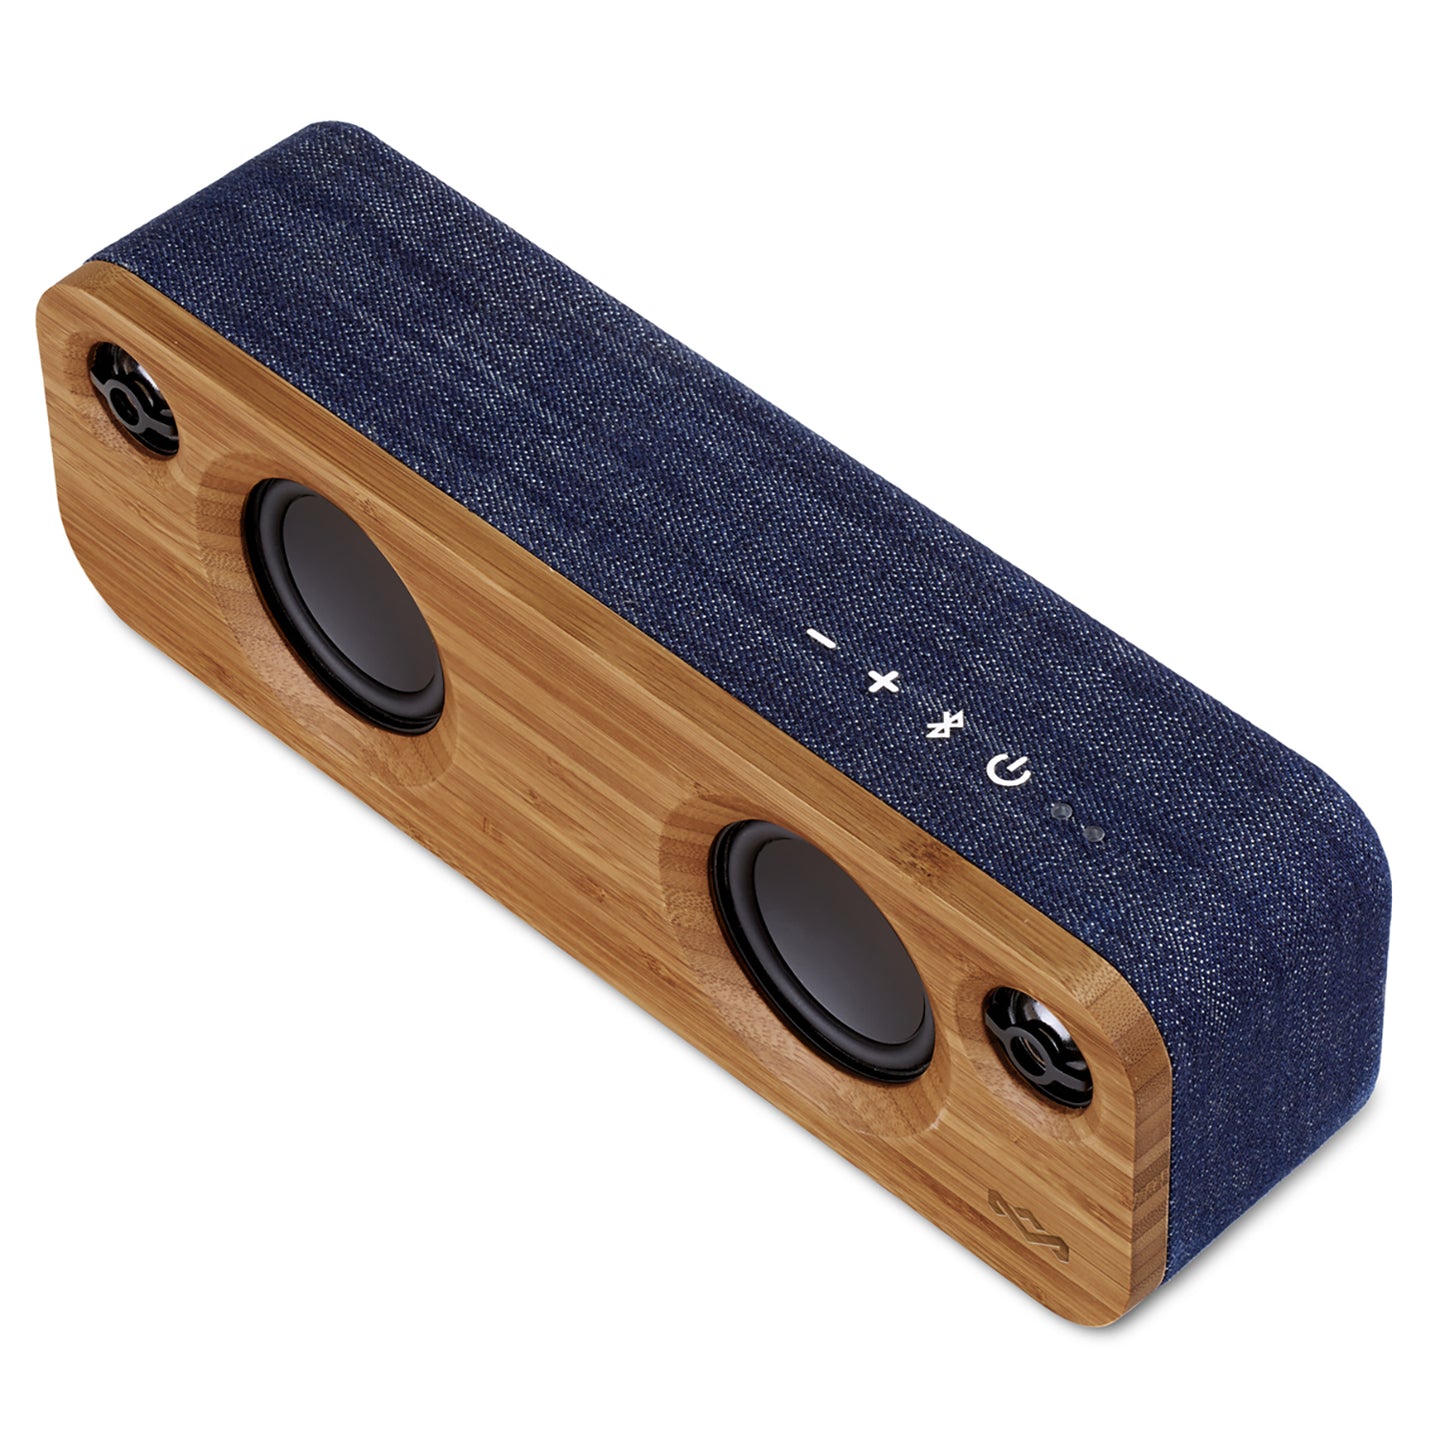 House of Marley's Get Together Mini Bluetooth Speaker Denim - Crystal clear sound, durable design and wireless freedom